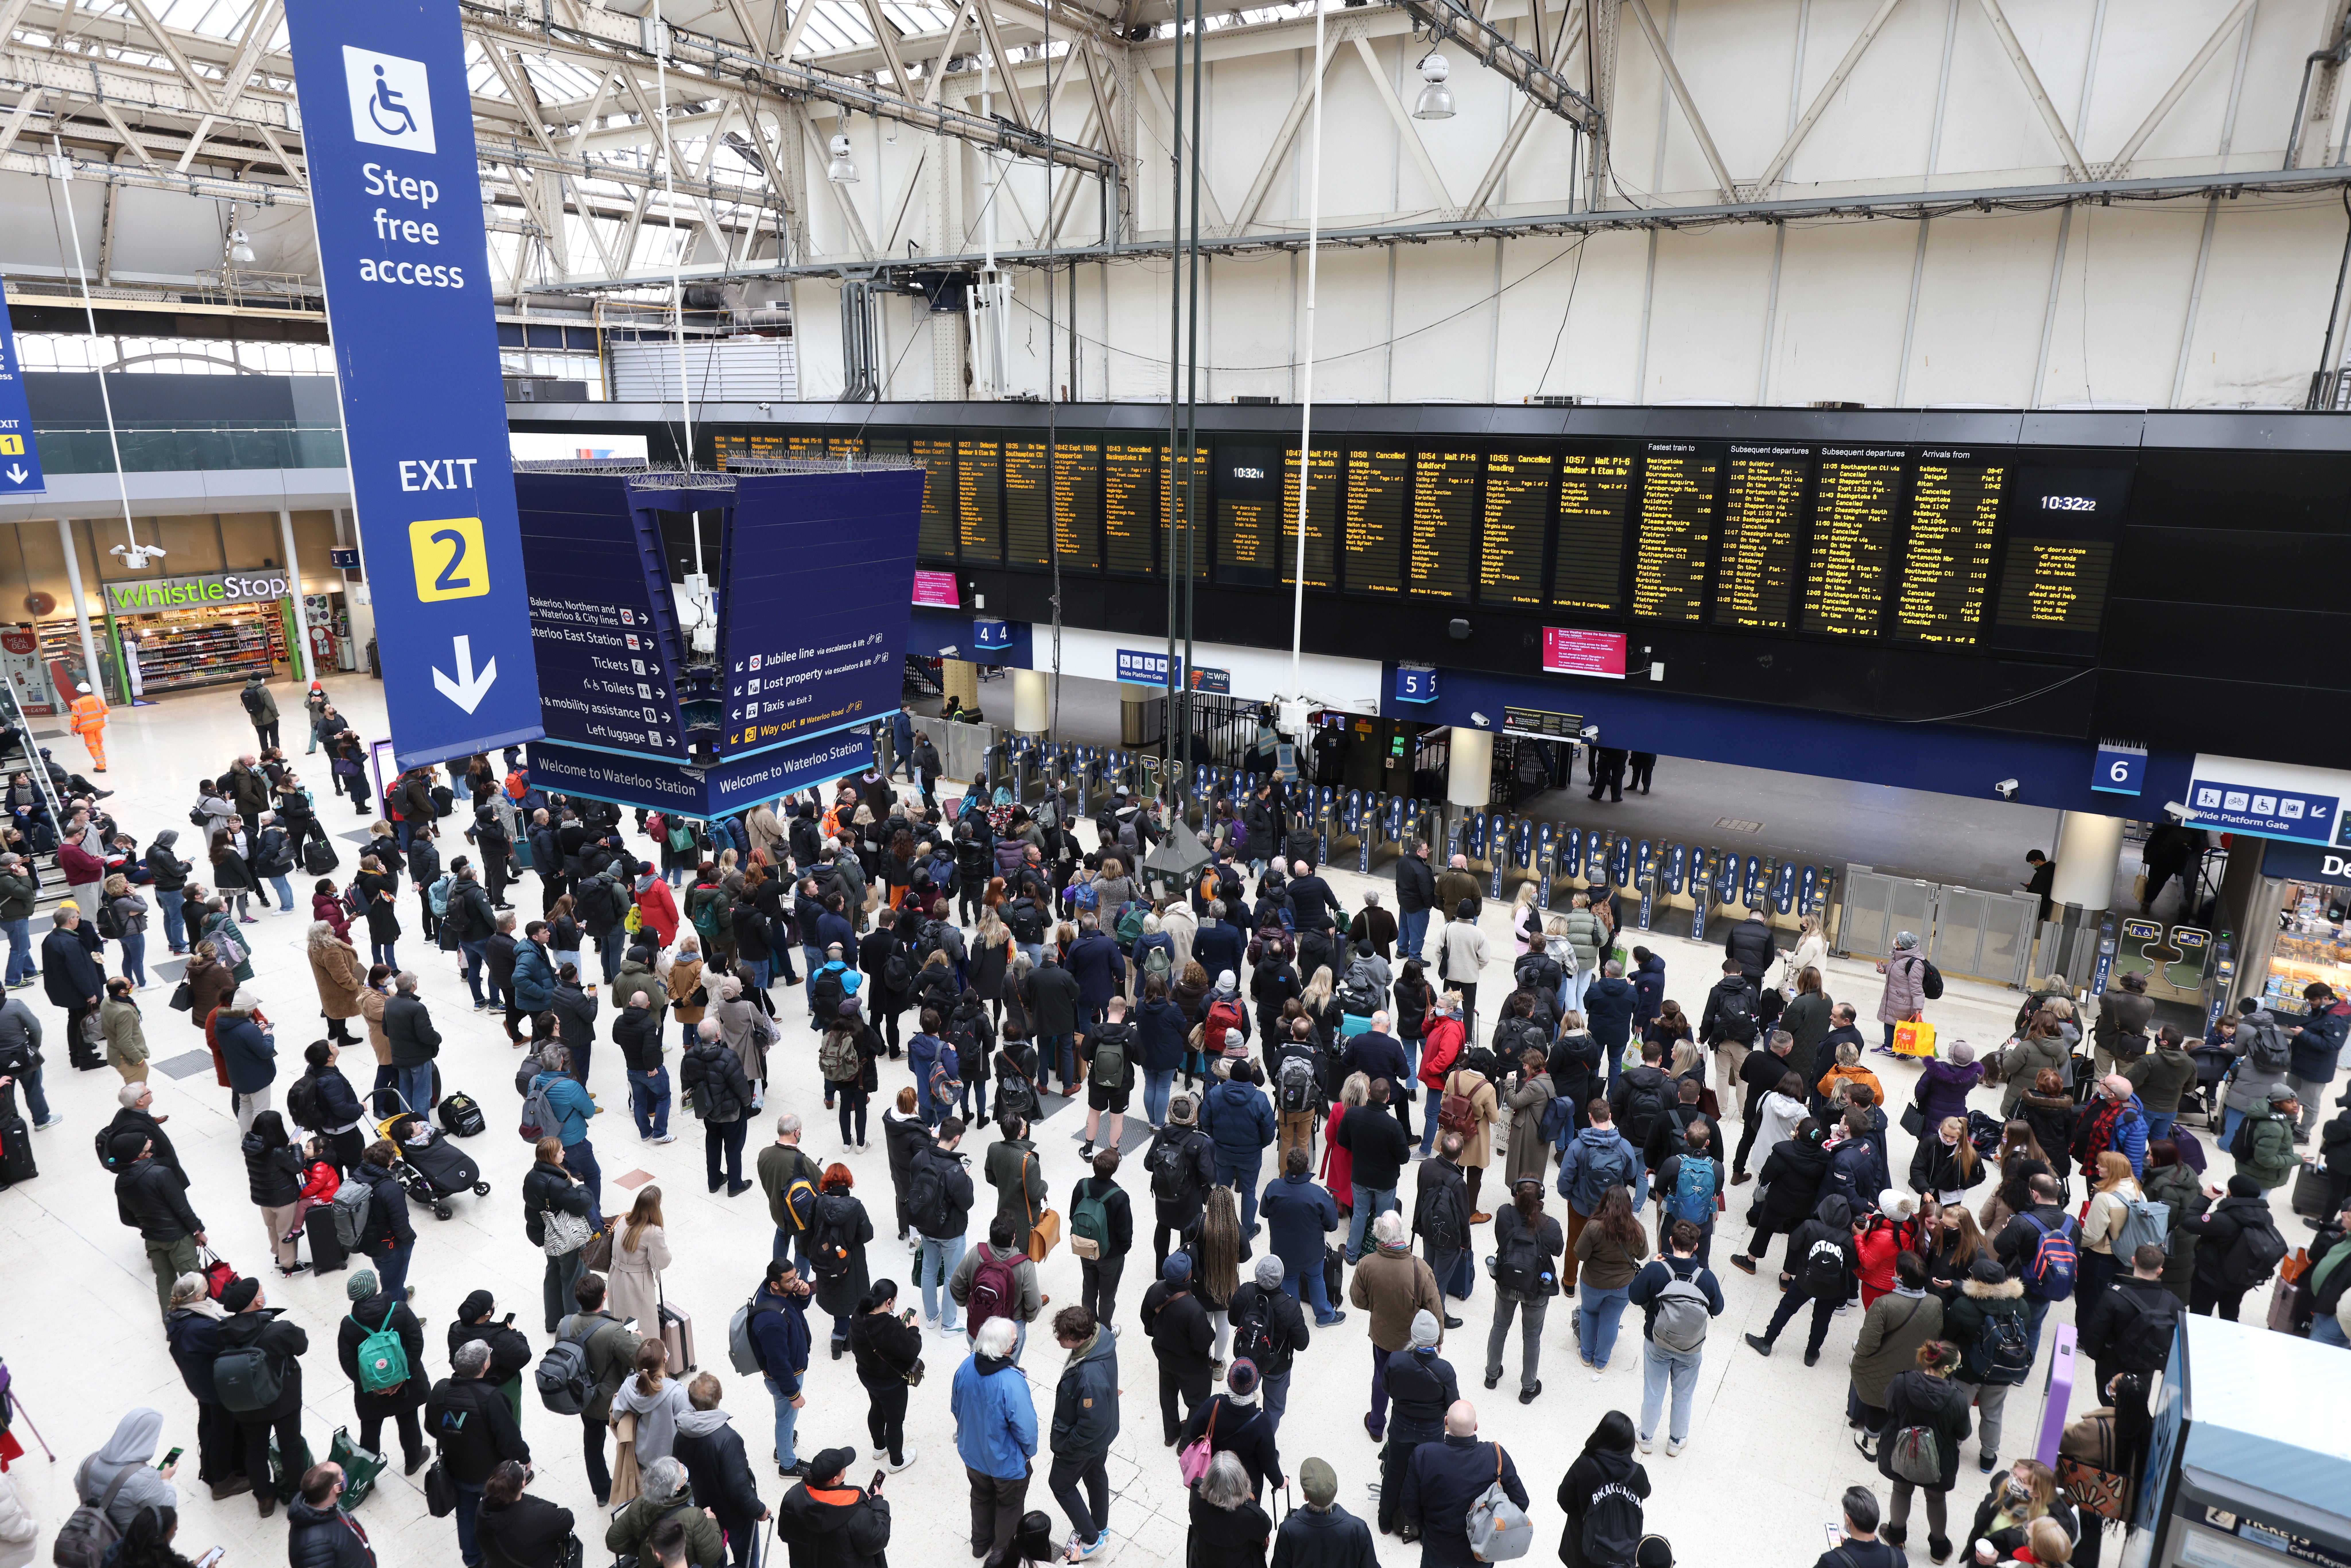 Passengers wait at Waterloo station, London, for cancelled or delayed trains in the aftermath of Storm Eunice (James Manning/PA)